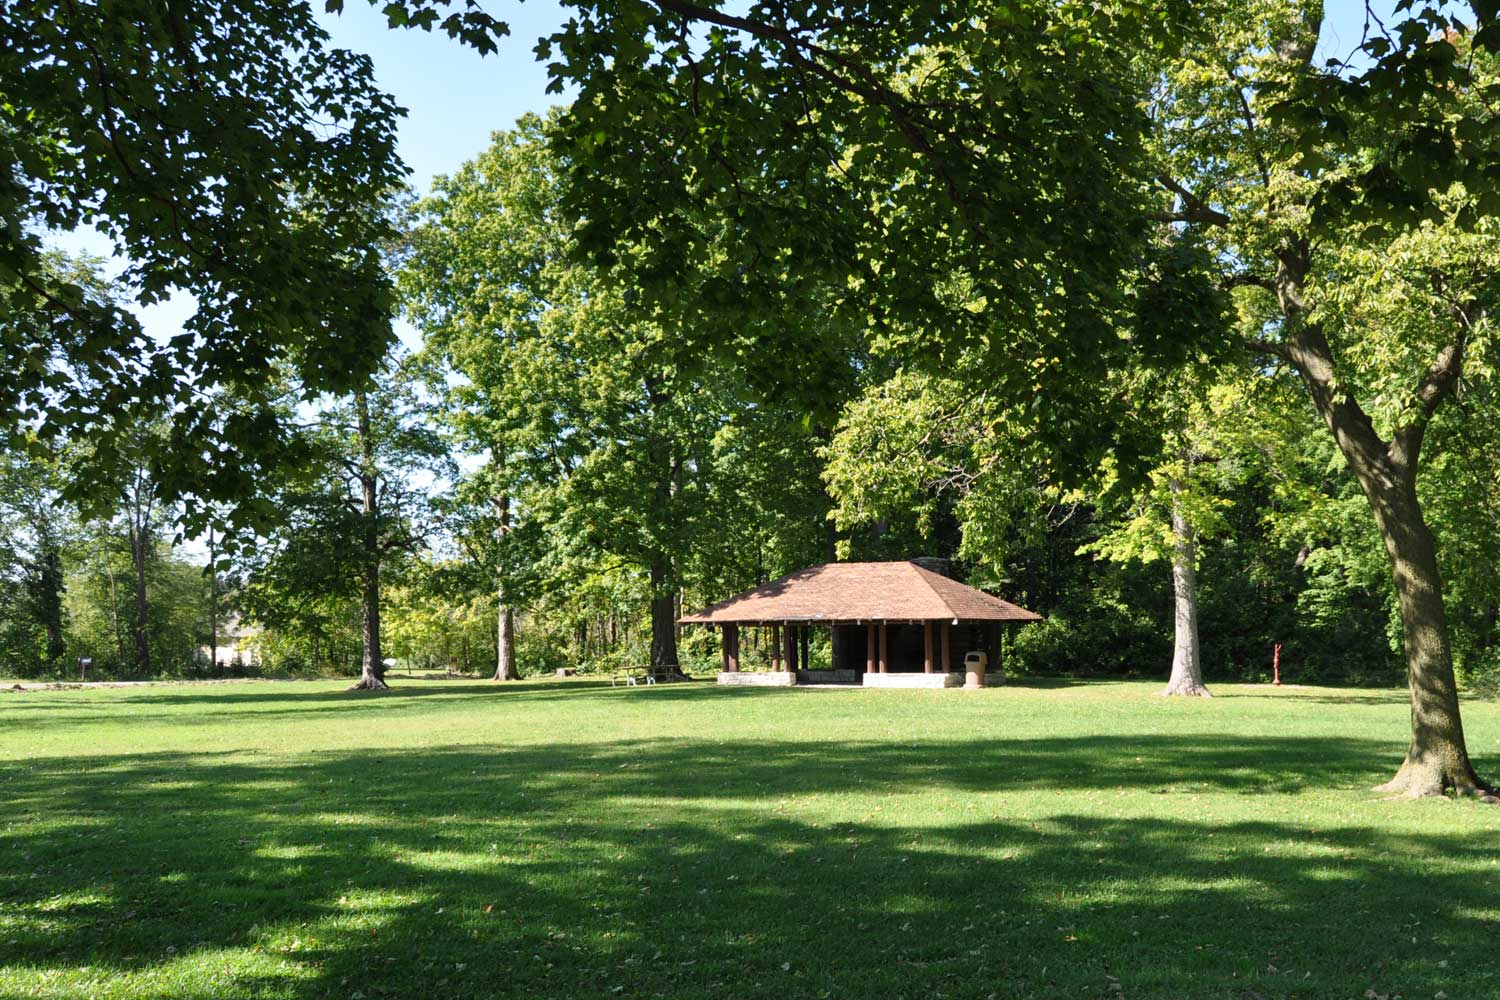 Picnic shelter surrounded by trees.